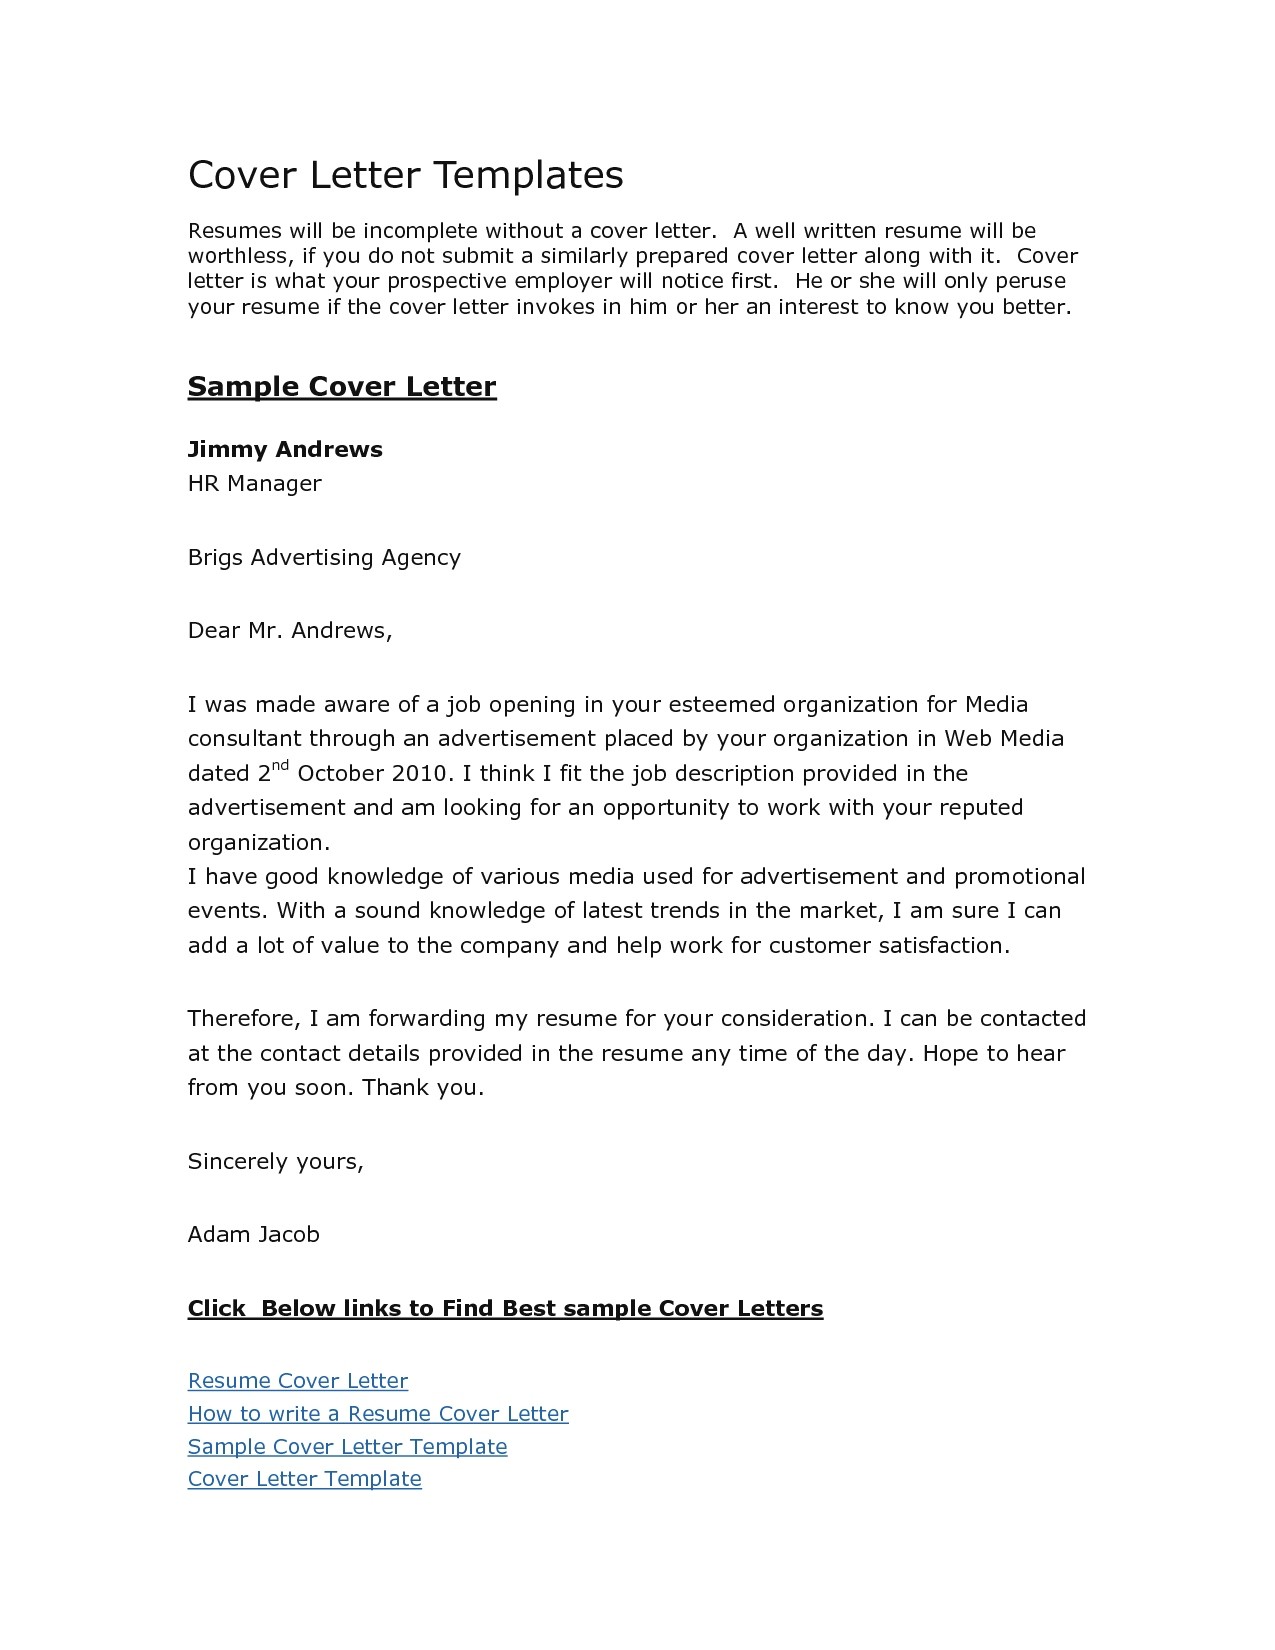 download cover letter for resume in word format